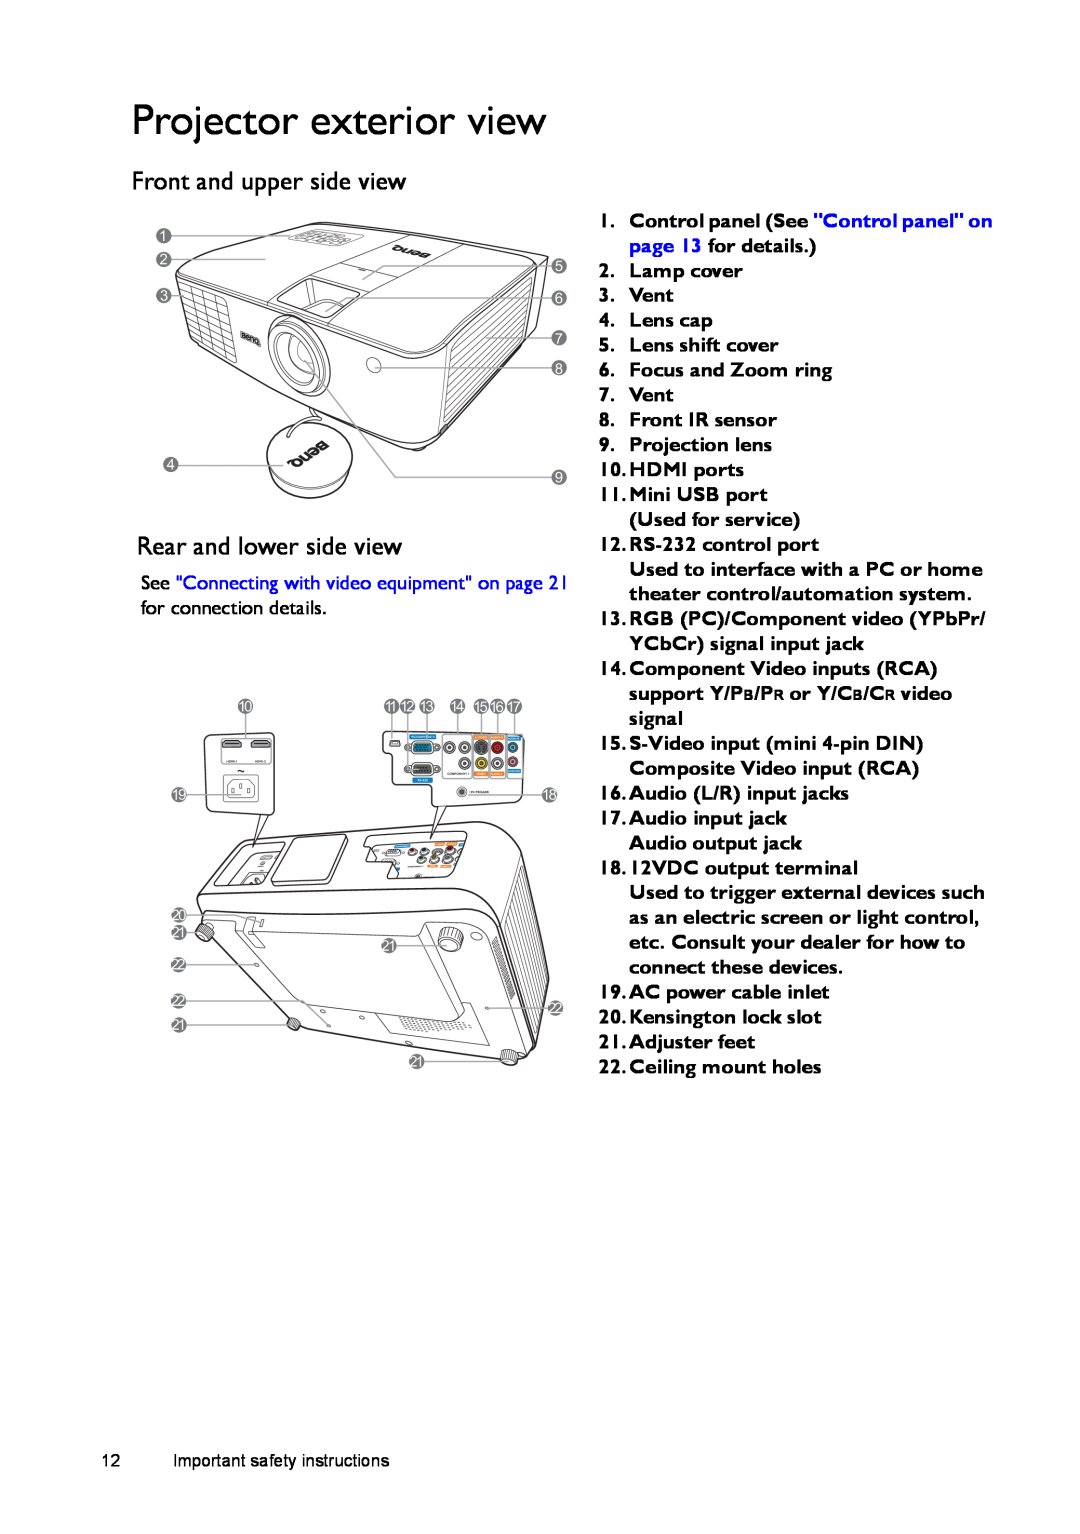 BenQ W1500 user manual Projector exterior view, Front and upper side view, Rear and lower side view 